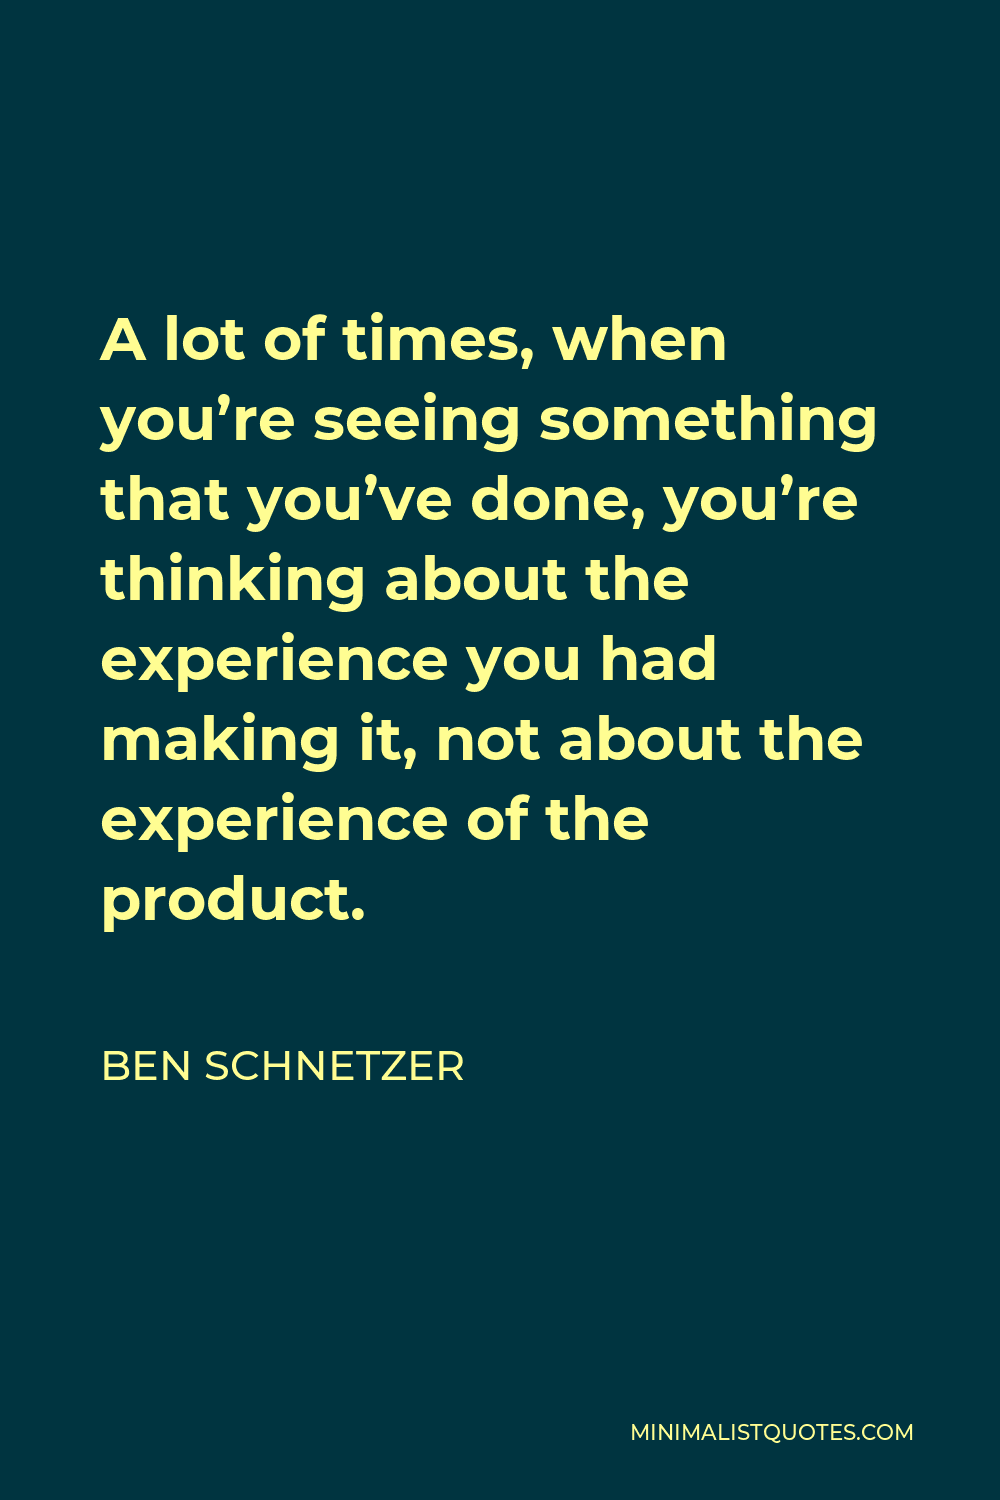 Ben Schnetzer Quote - A lot of times, when you’re seeing something that you’ve done, you’re thinking about the experience you had making it, not about the experience of the product.